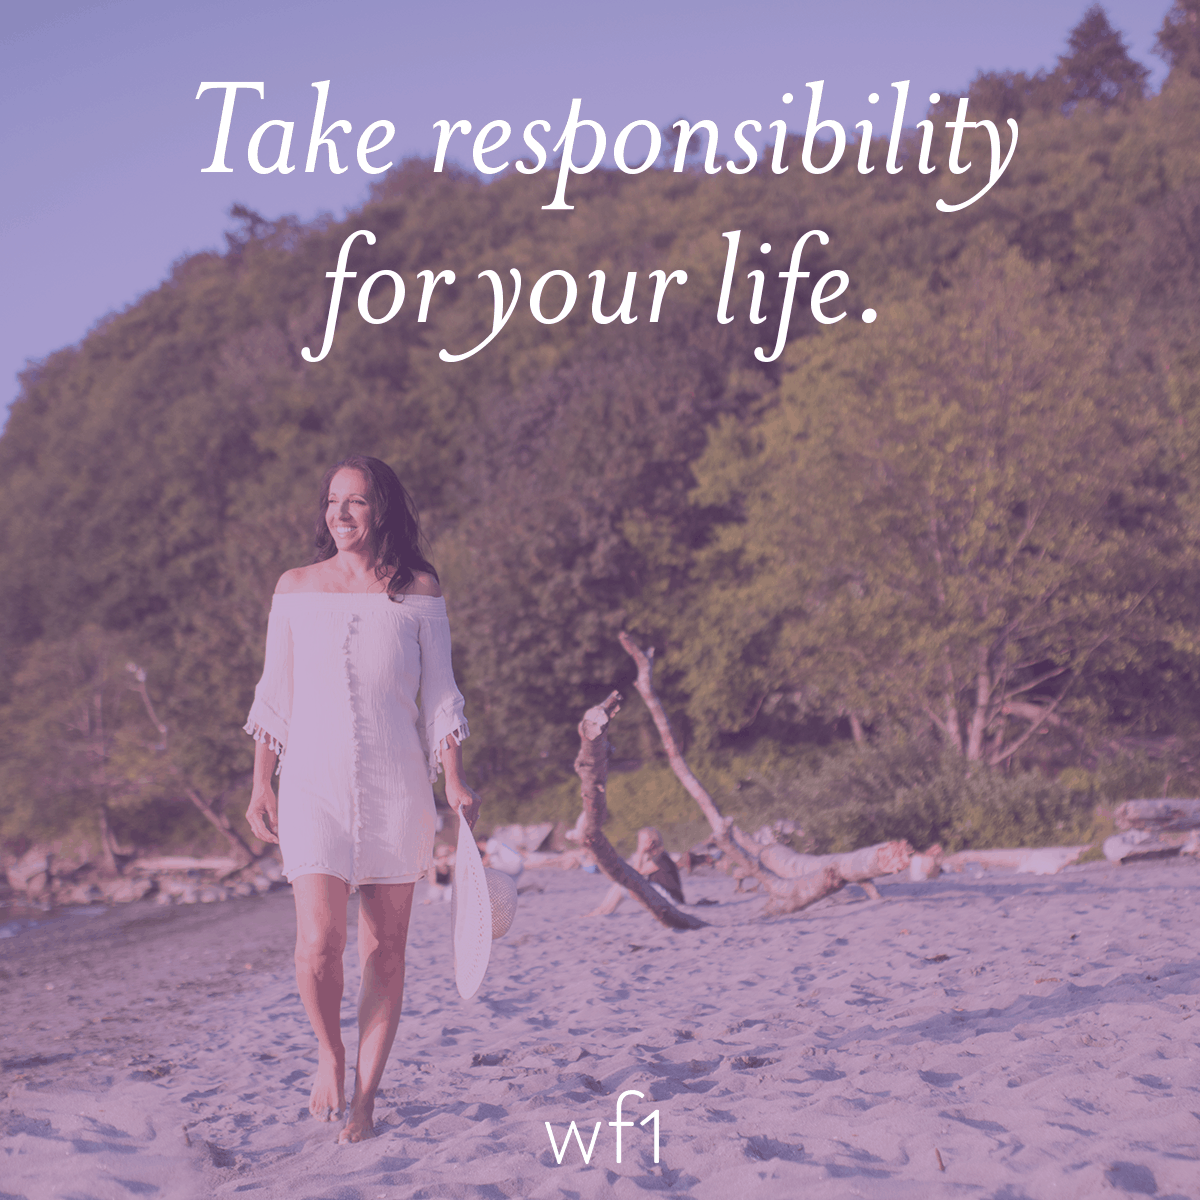 Take responsibility for your life.